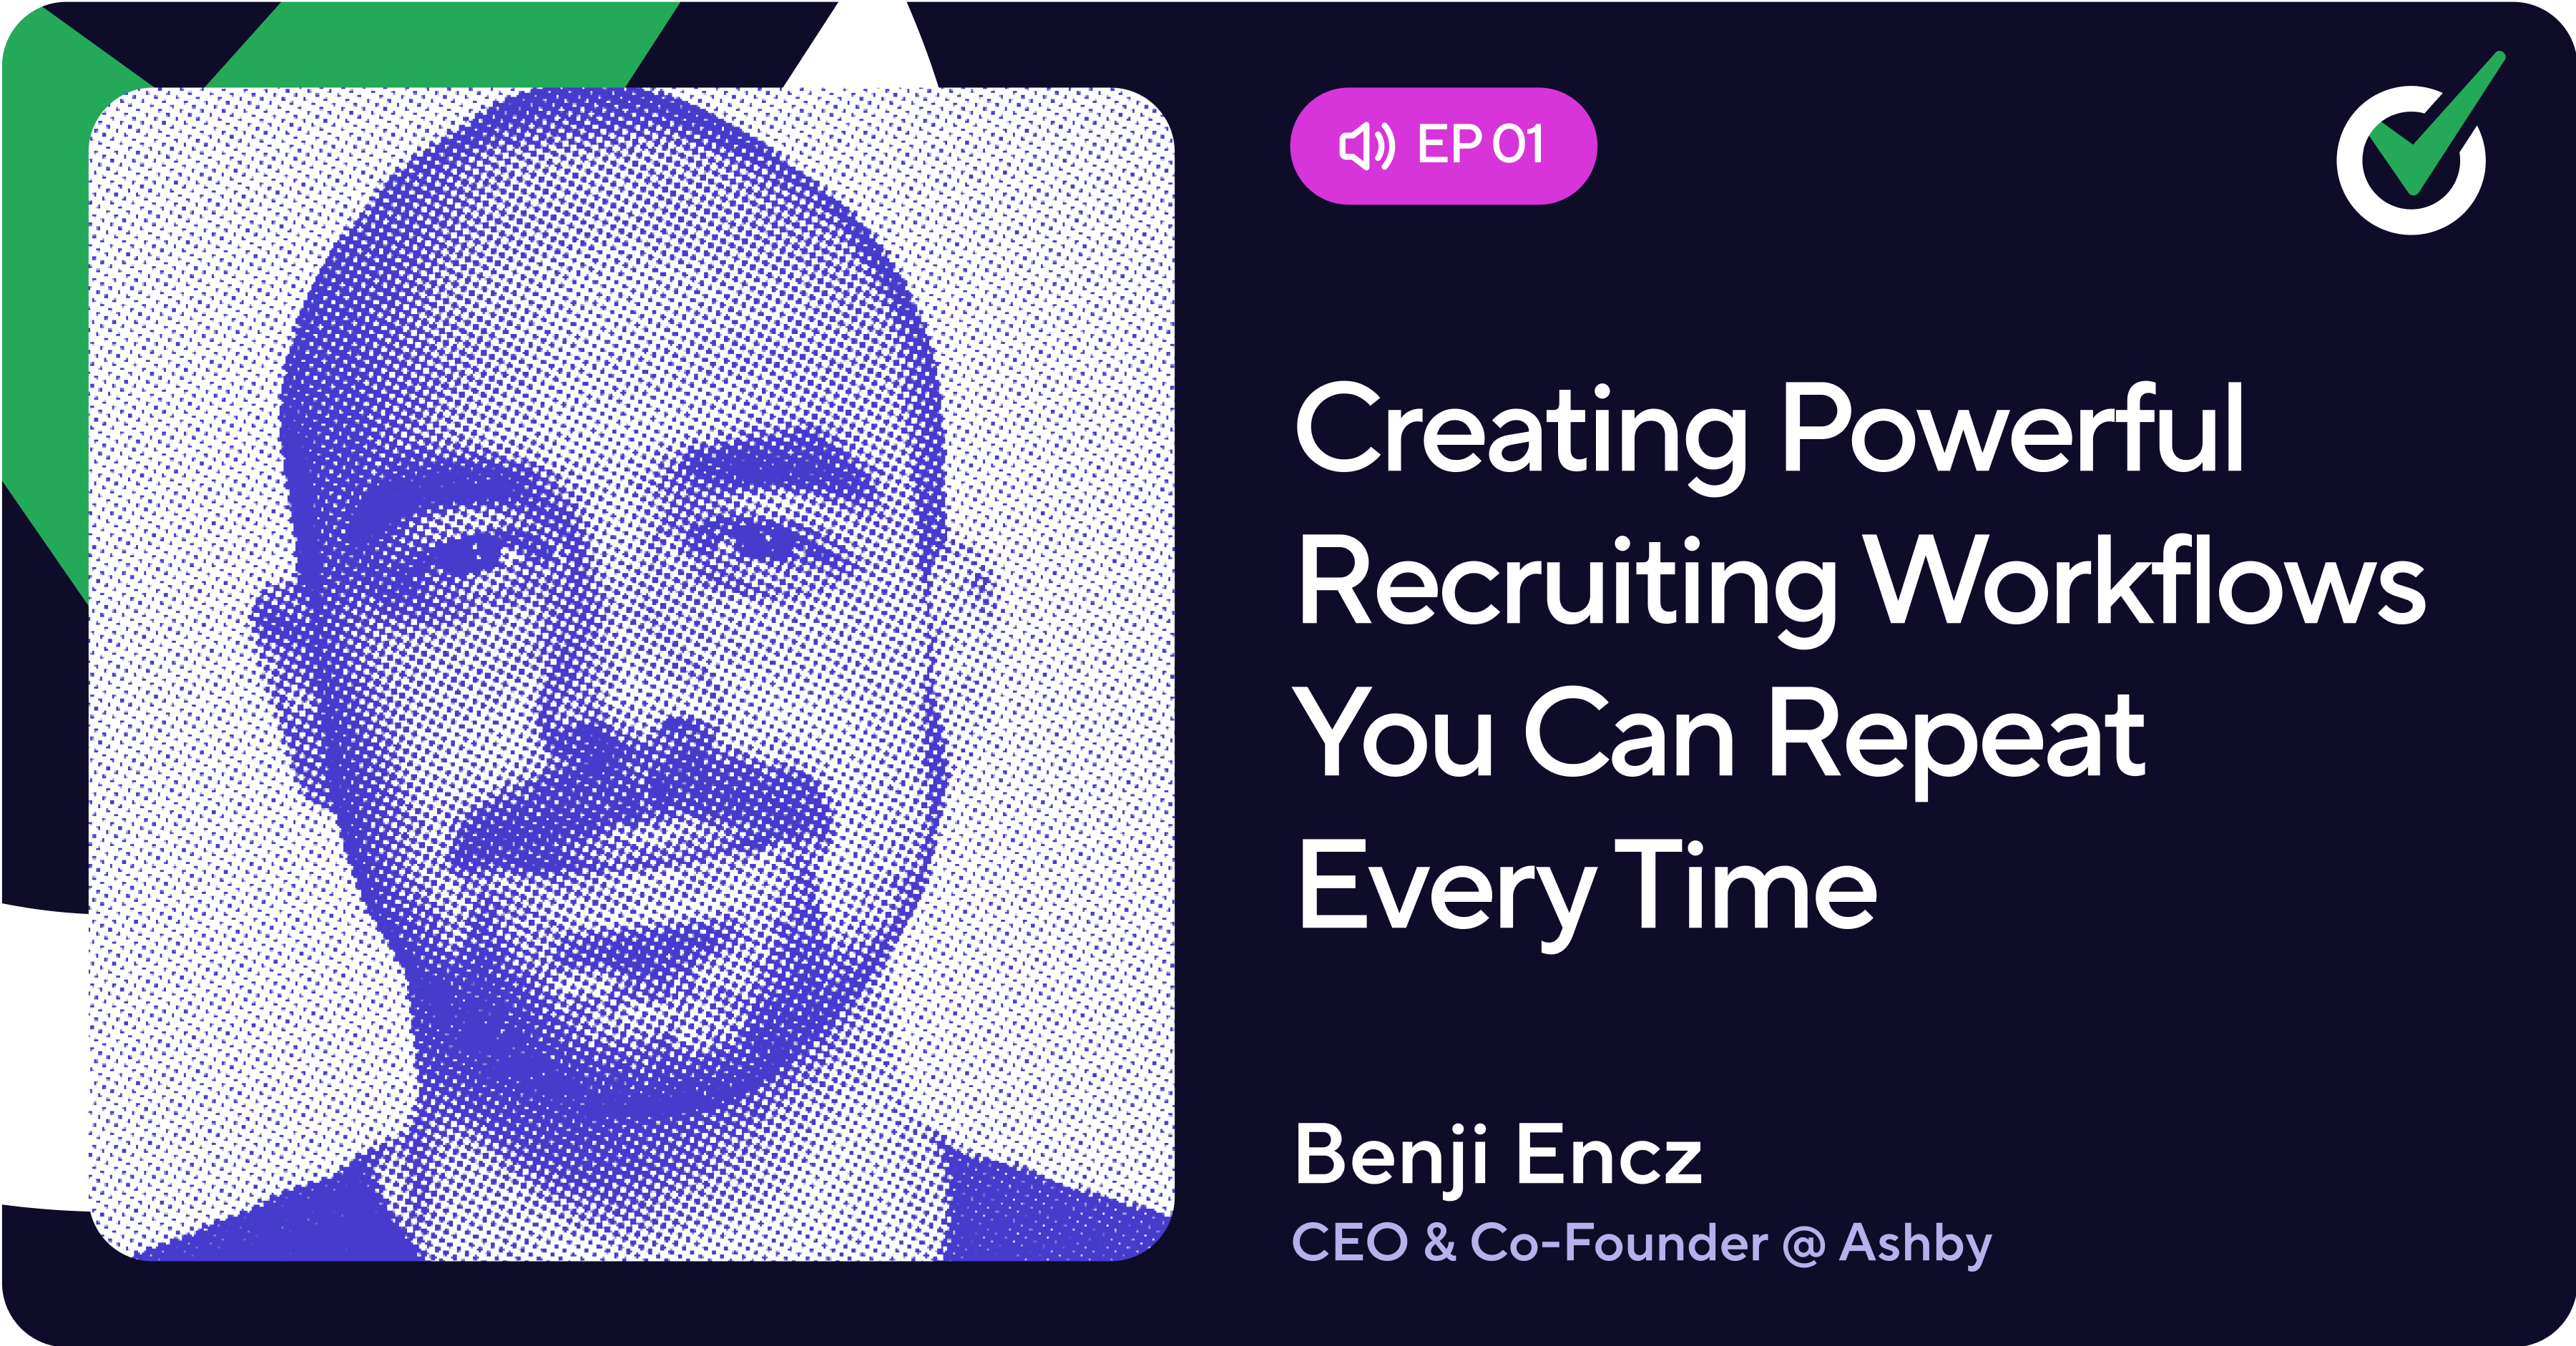 Episode 1 - Creating Powerful Recruiting Workflows You Can Repeat Every Time